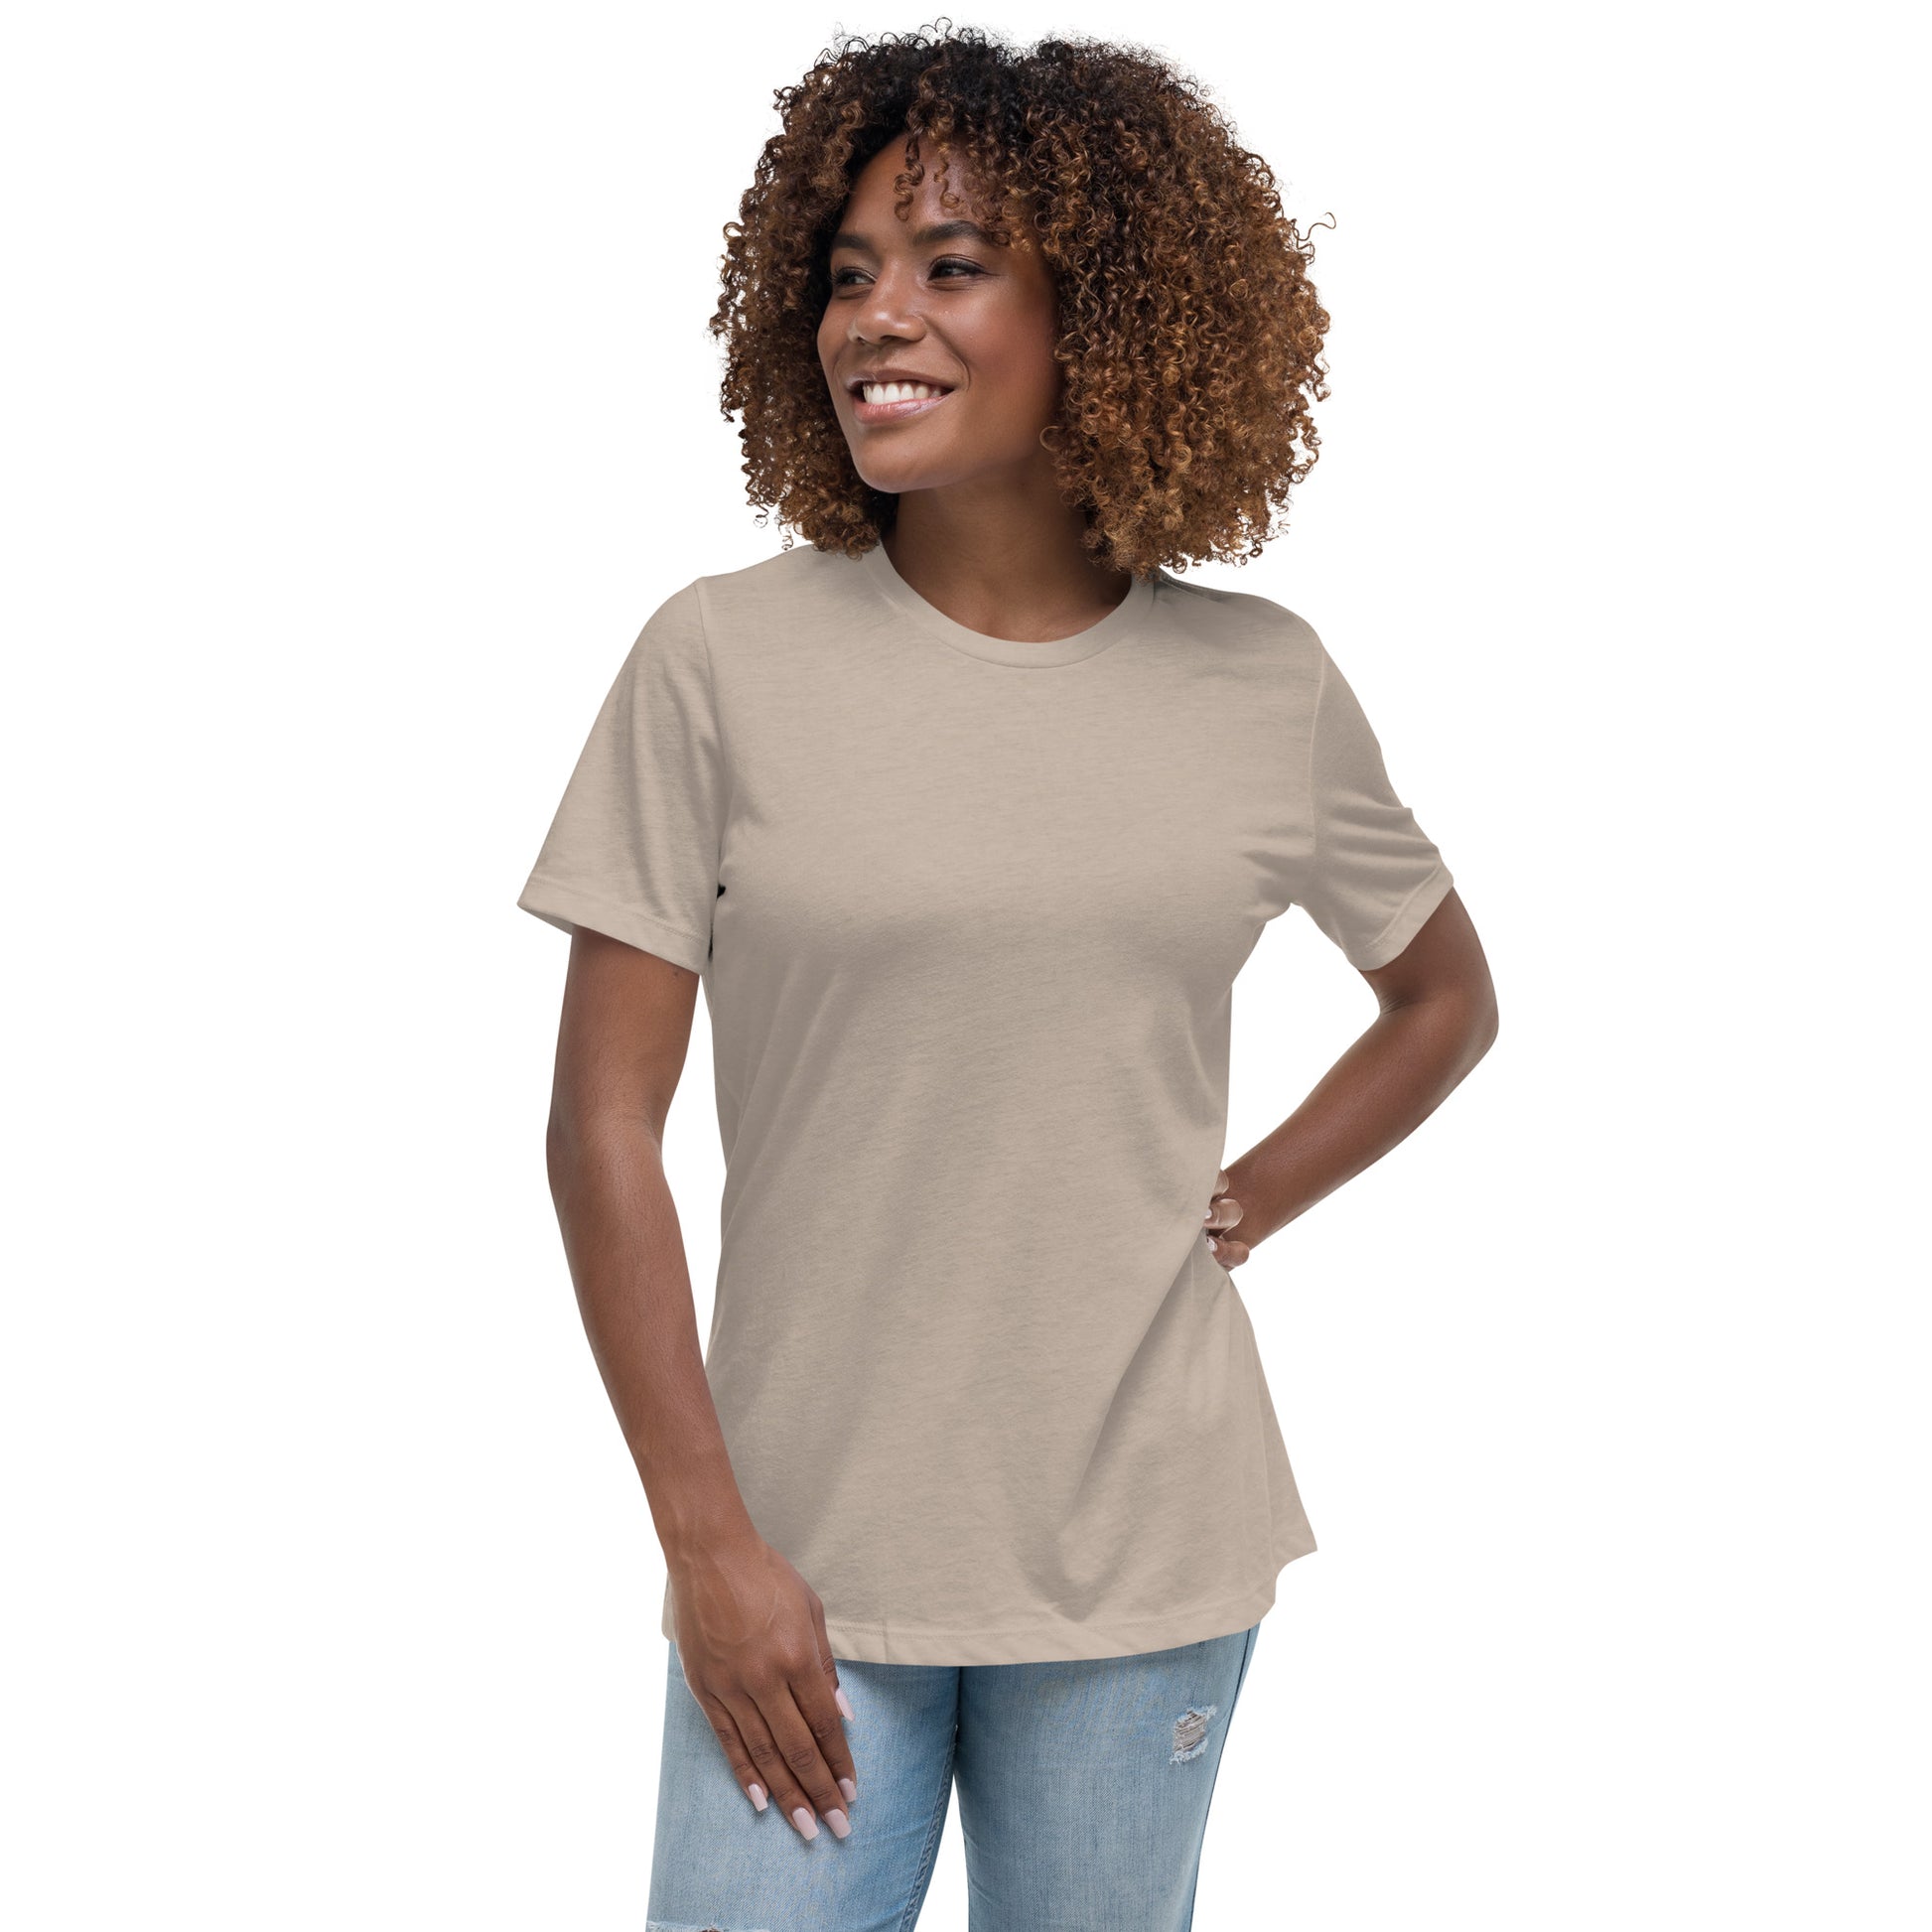 Women with a stone T-shirt without print on the front